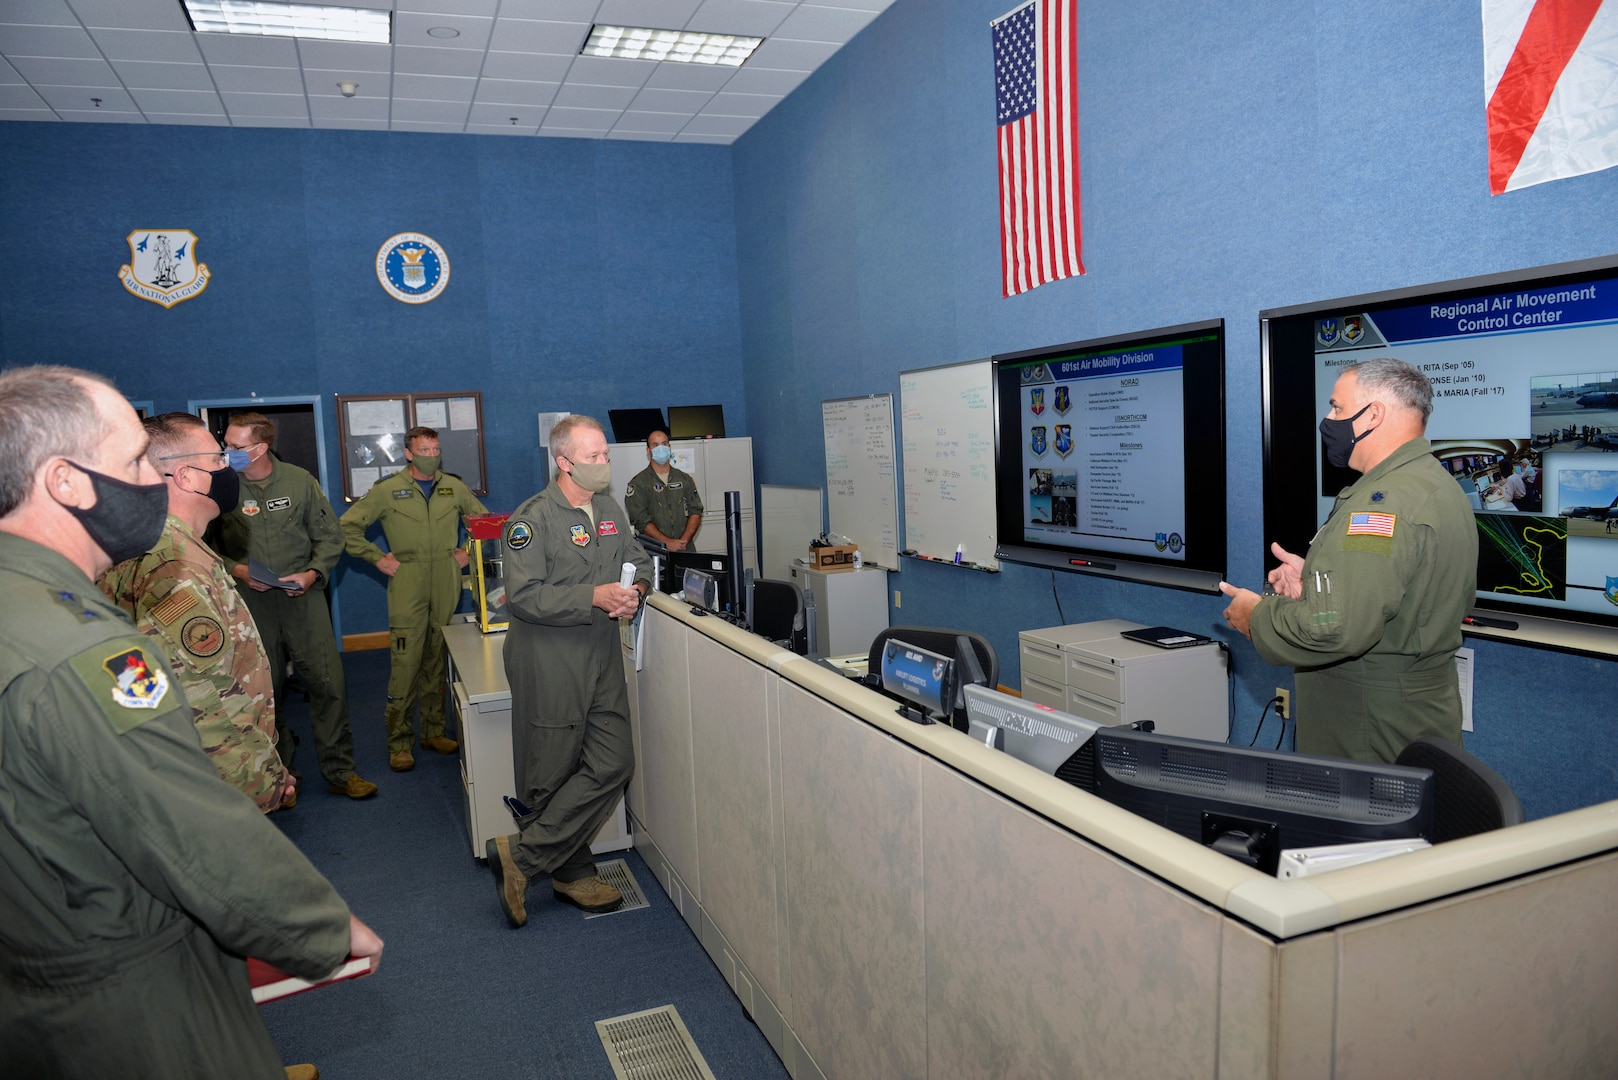 U.S. Air Force Lt. Col. Lewis Hagler, 601st Air Operations Center Air Mobility Division, briefs U.S. Air Force Gen. Mark Kelly, commander of Air Combat Command, on the AOC’s air mobility operations during a visit to Tyndall Air Force Base, Florida, Sept. 29, 2020.